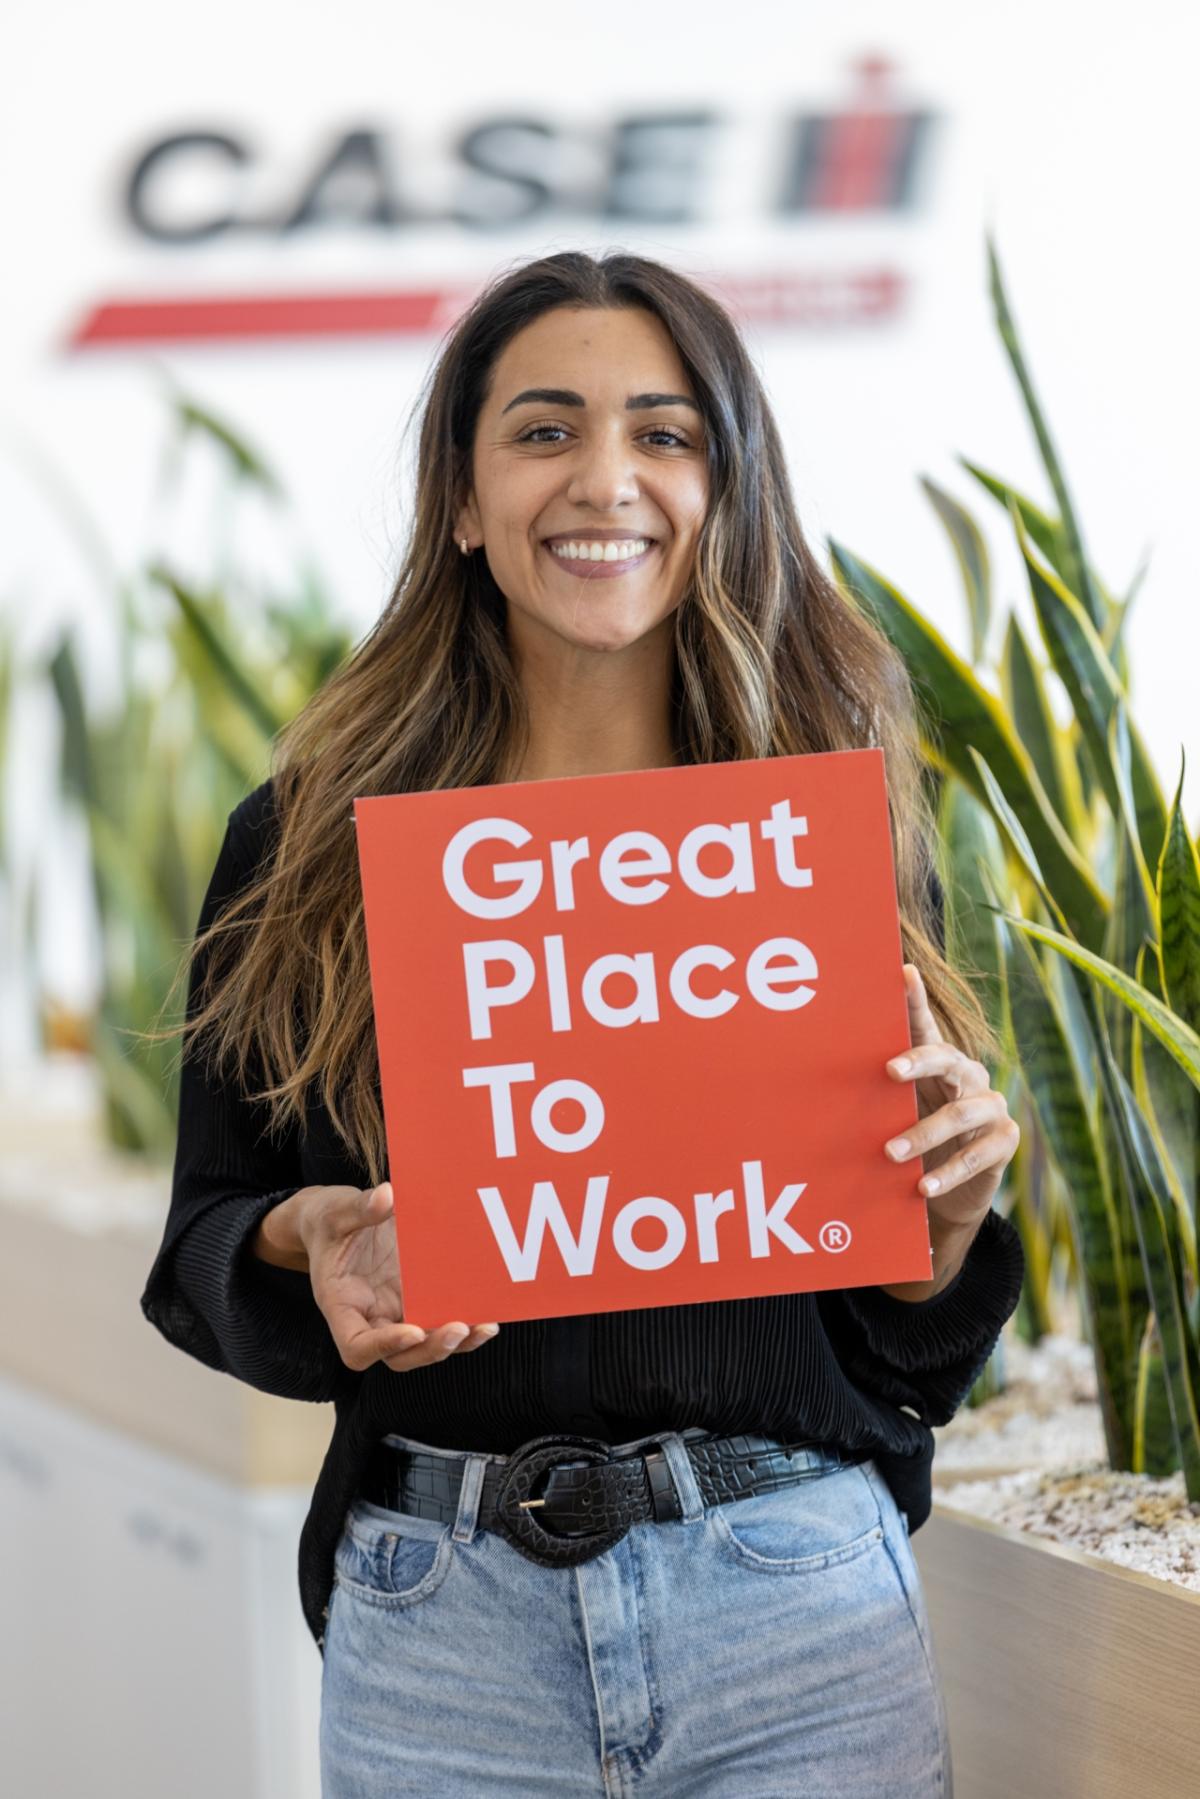 person holding a sign saying "Great Place to Work"